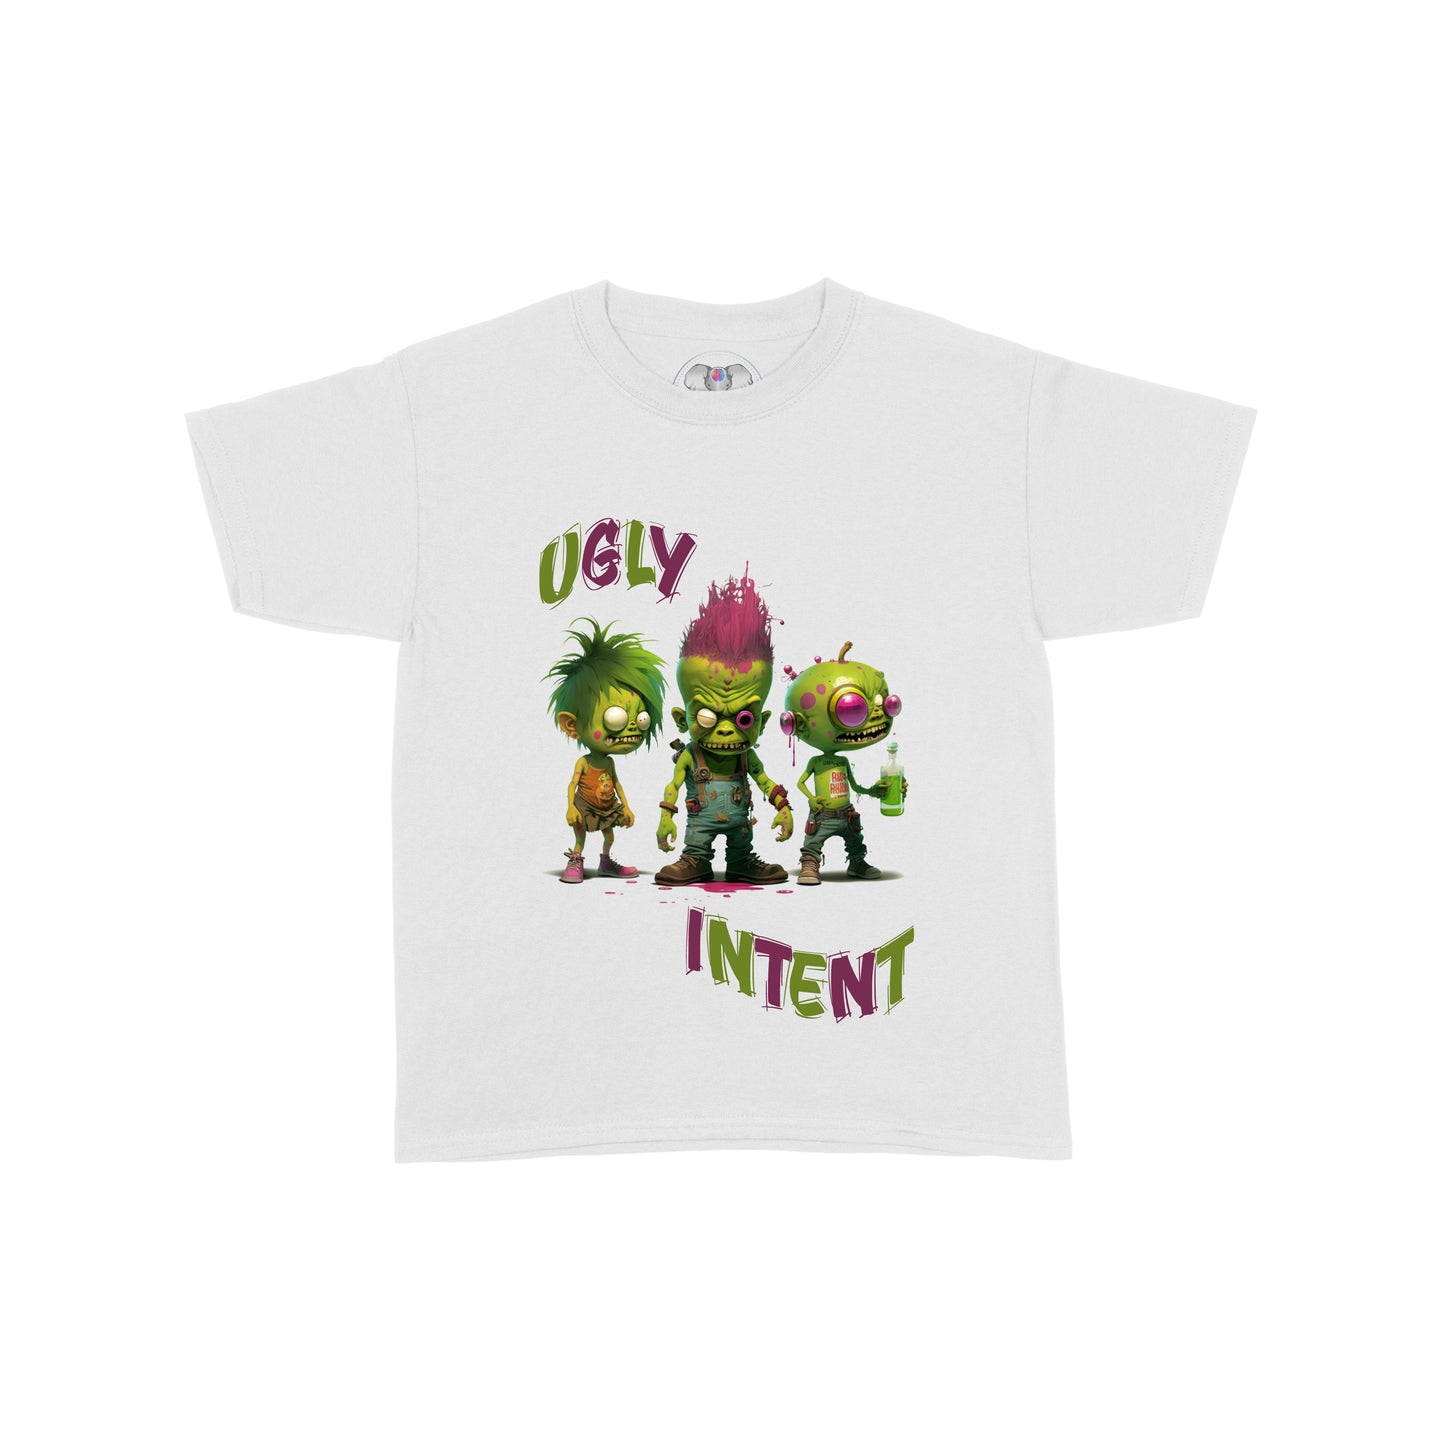 Ugly Intent Graphic T-shirt Youth